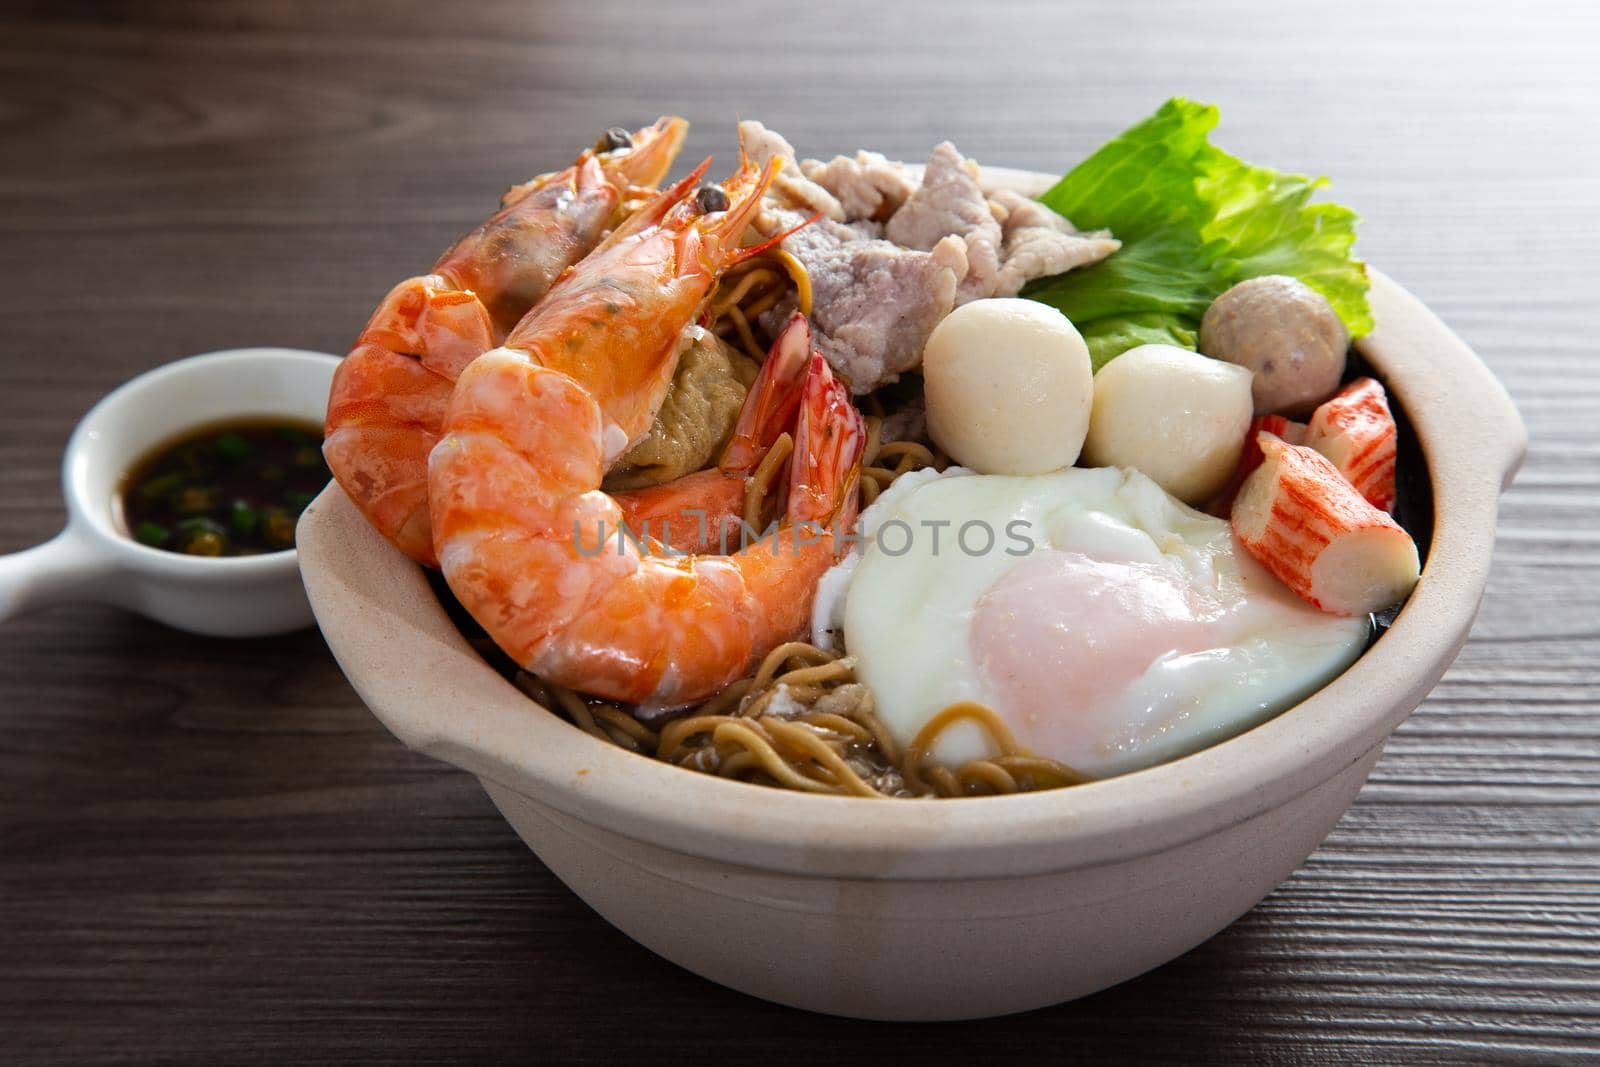 Clay Pot Yee Mee Seafood Noodle Soup  by tehcheesiong